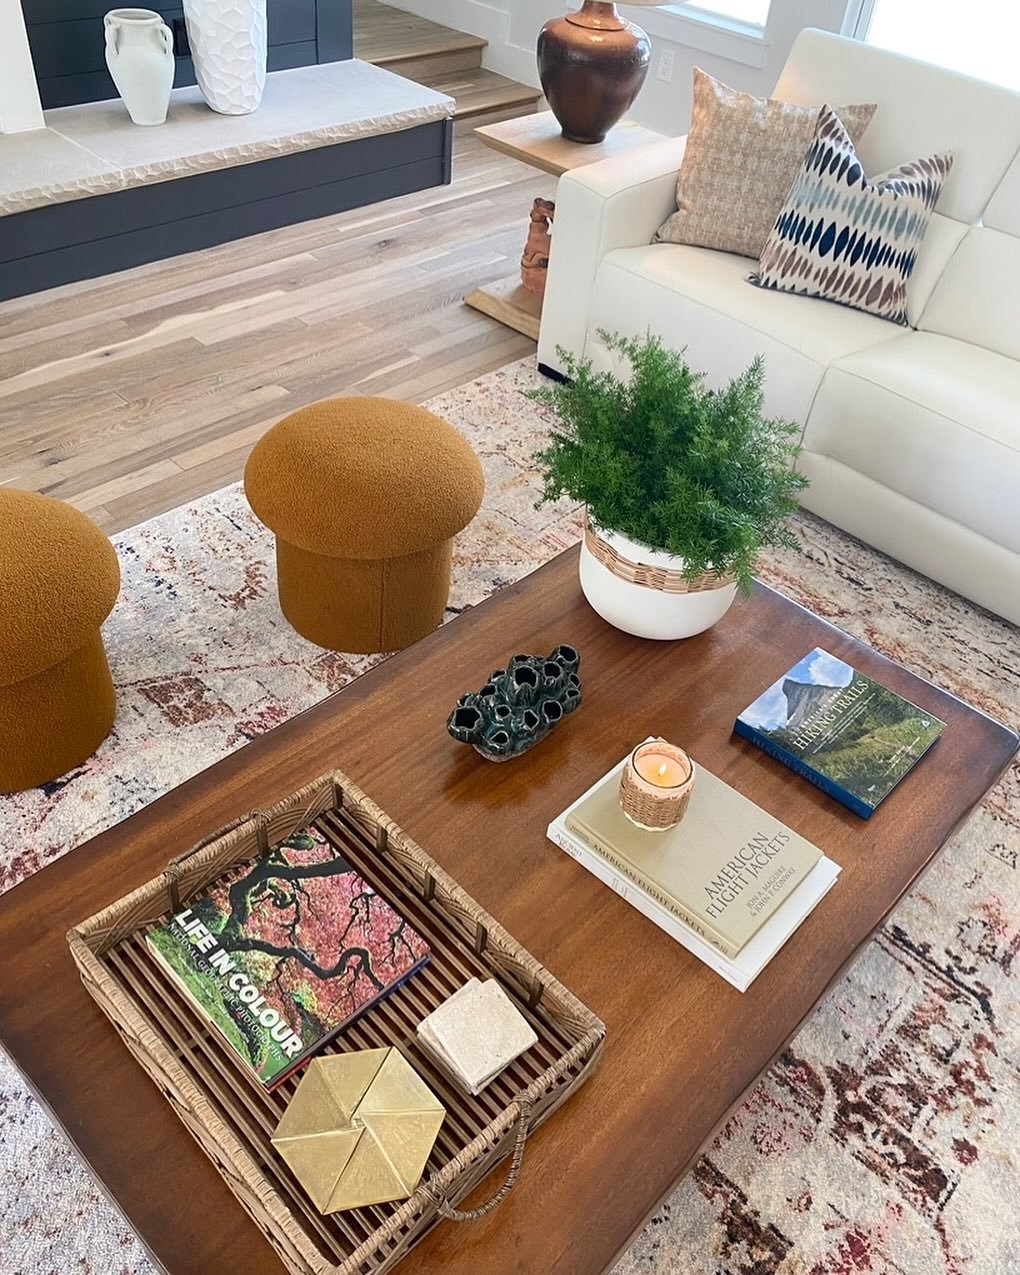 Coffee table styling is such fun! It&rsquo;s a place you can layer meaningful objects, books or collections that create conversation. A tray whether it is rattan, acrylic, or wood is always a great way to create those design layers.  It also makes it